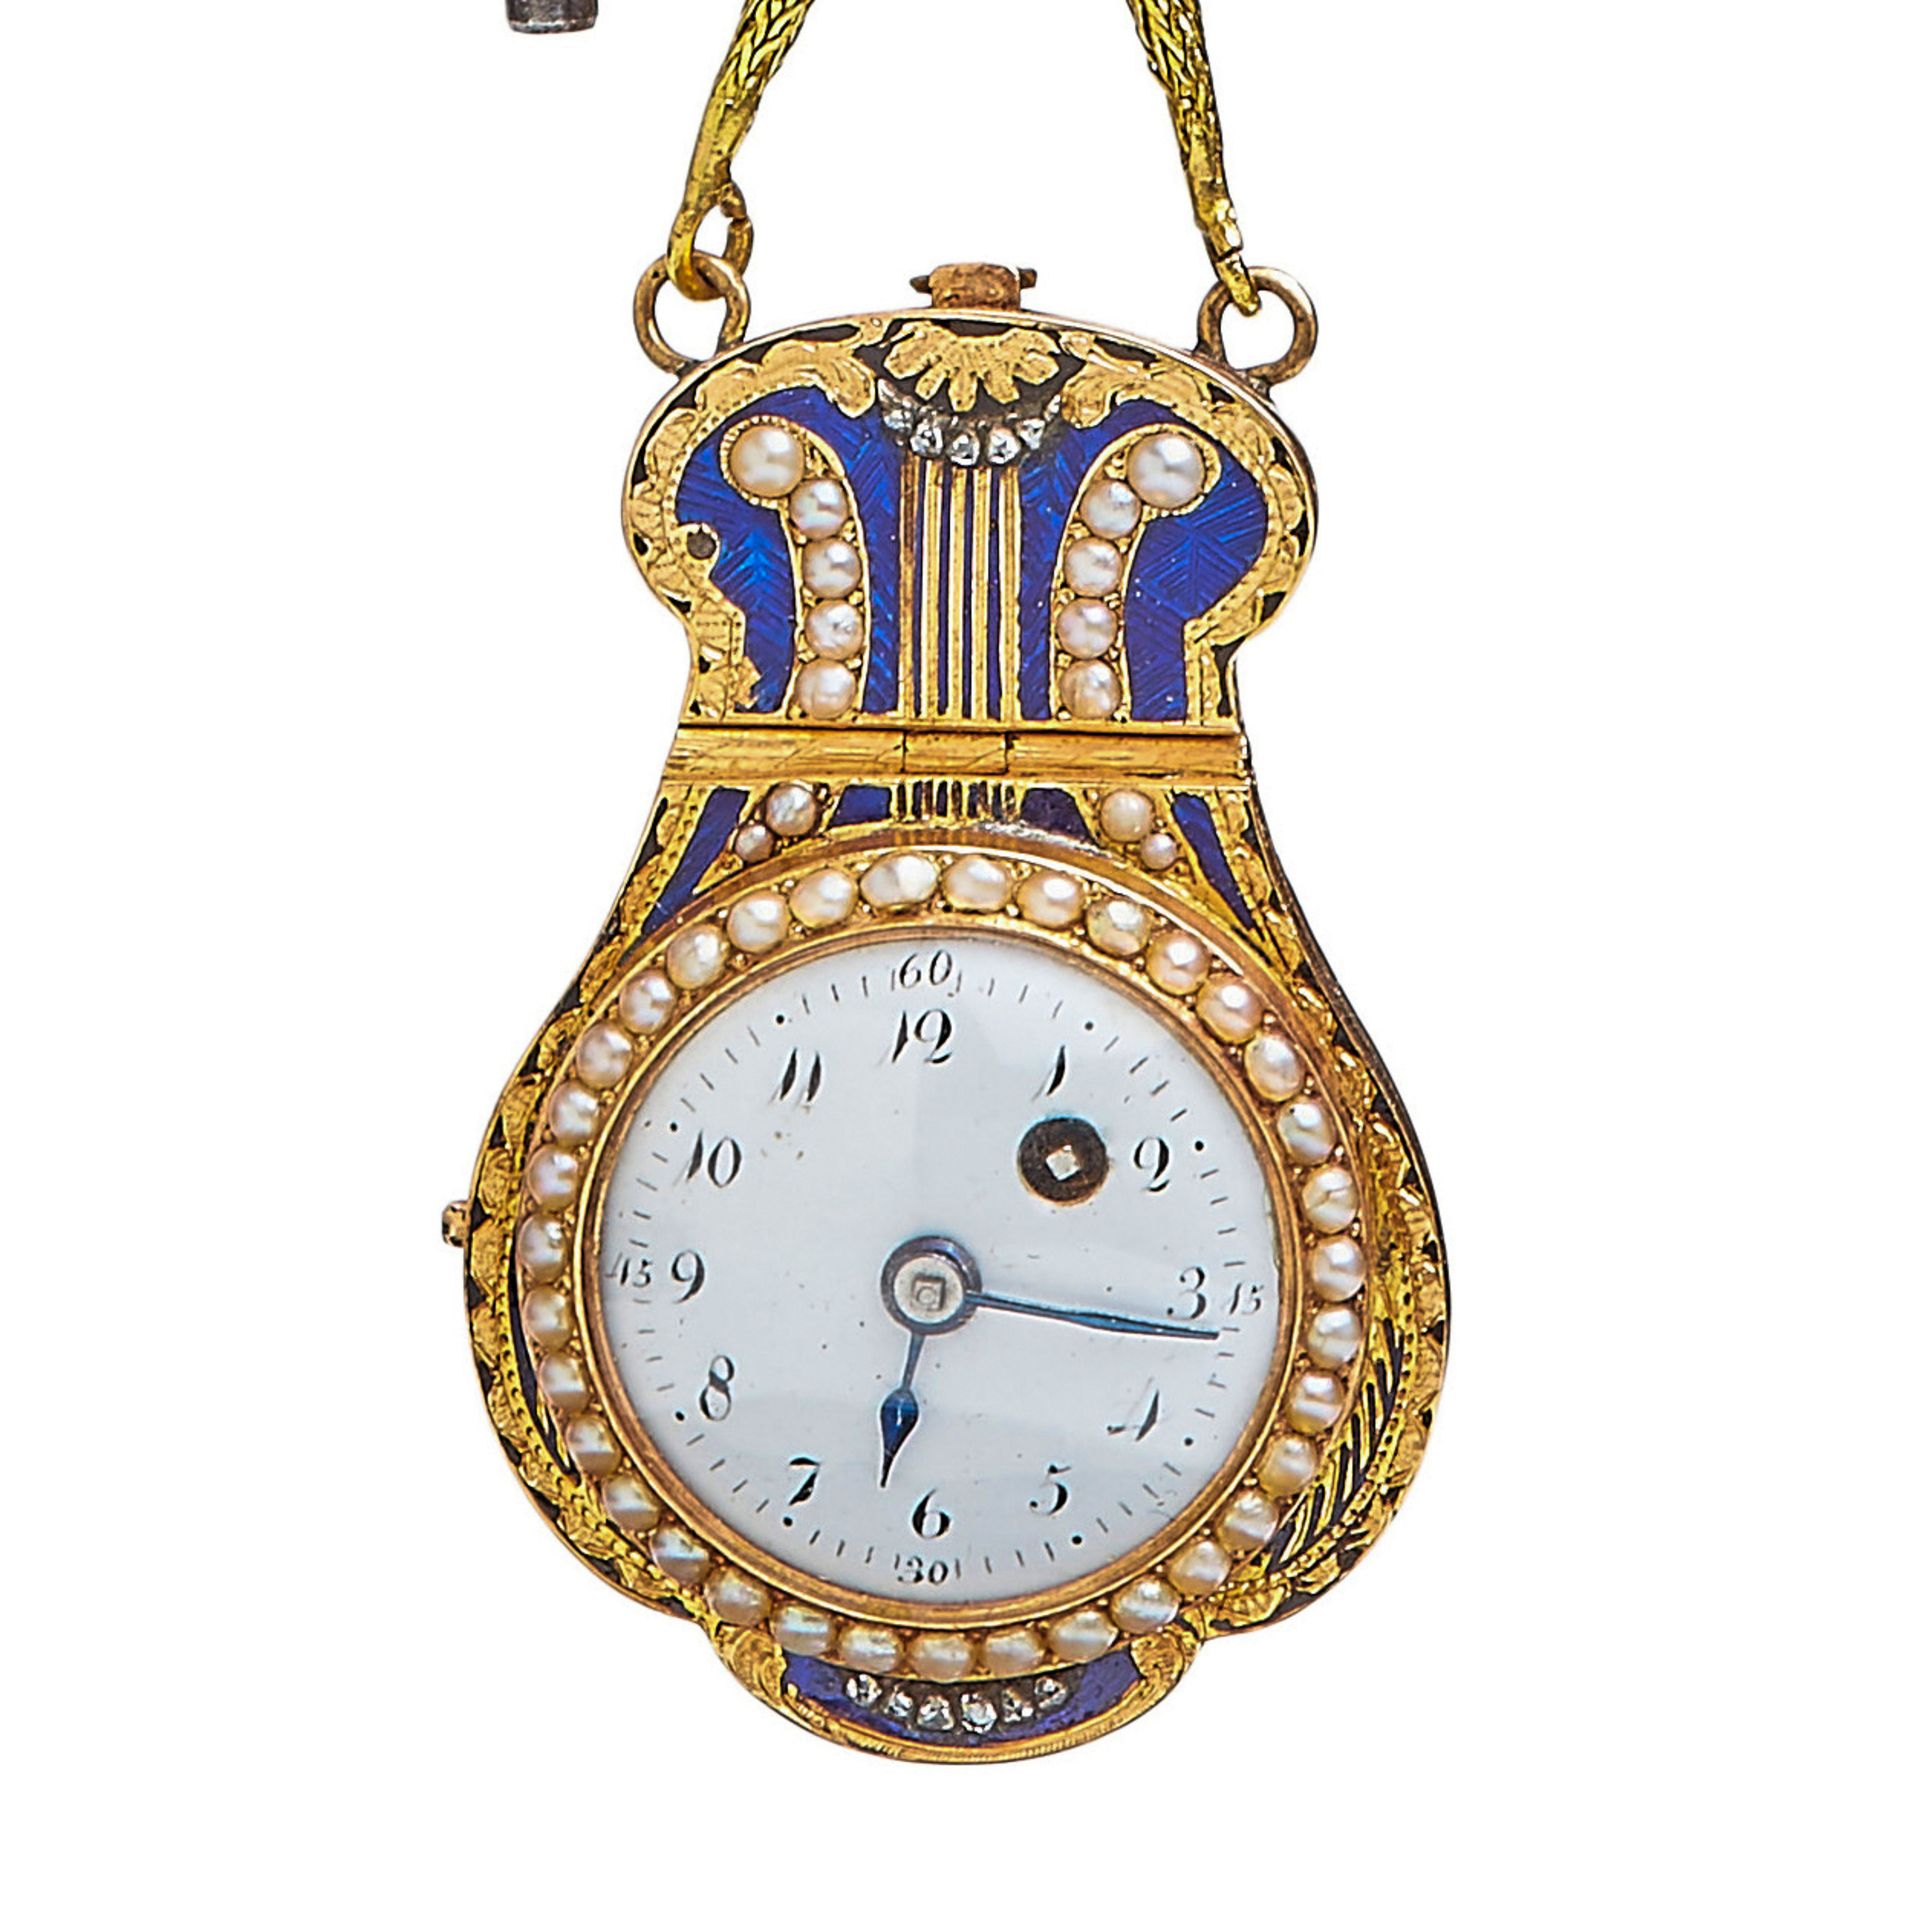 IMPORTANT GOLD AND ENAMEL POCKETWATCH CHATELAINE - Image 4 of 5